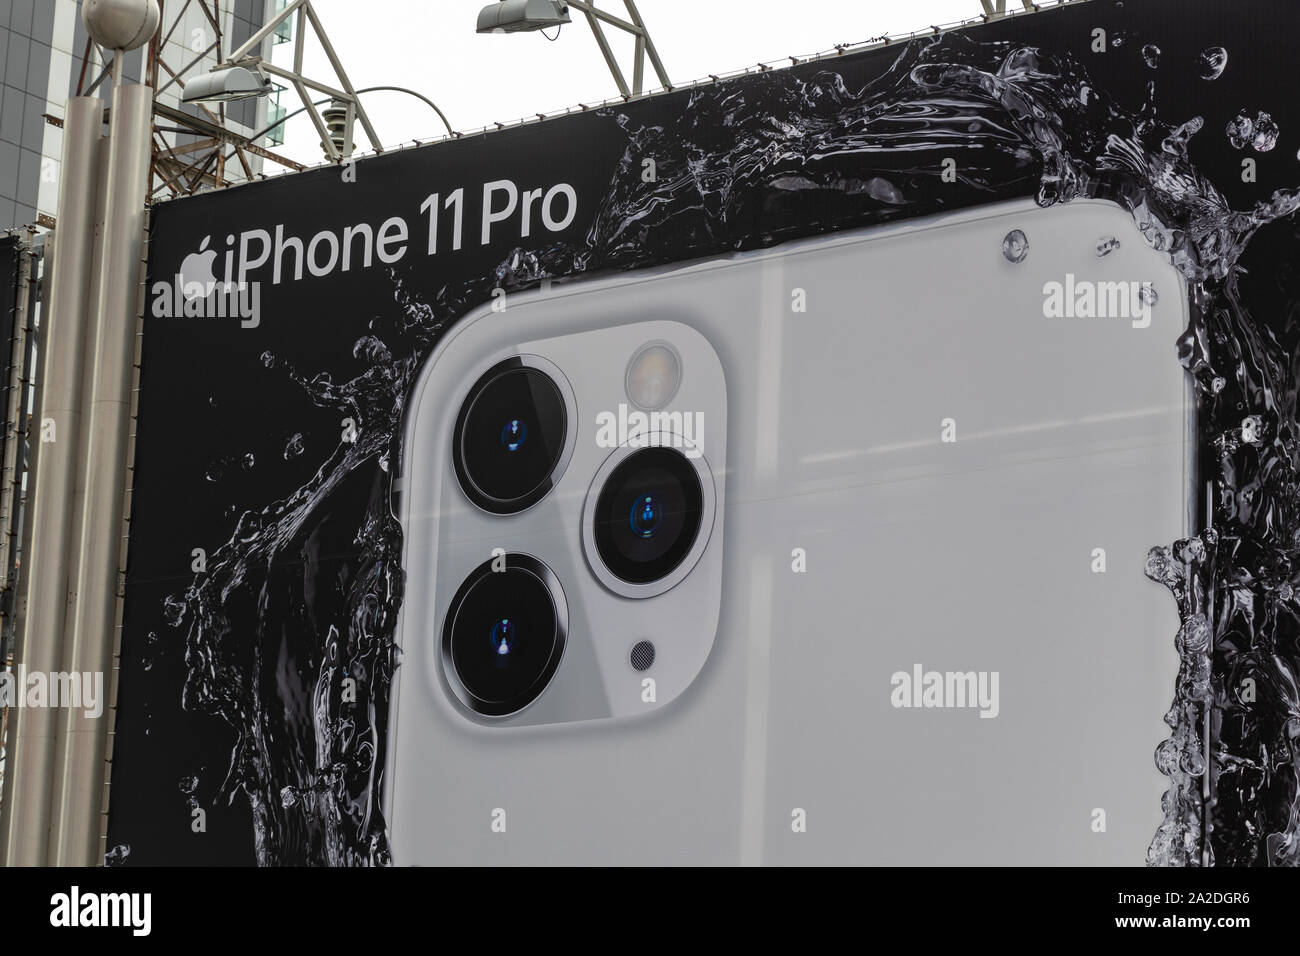 iPhone 11 Pro (Silver) advertisement billboard located in downtown Toronto. Stock Photo